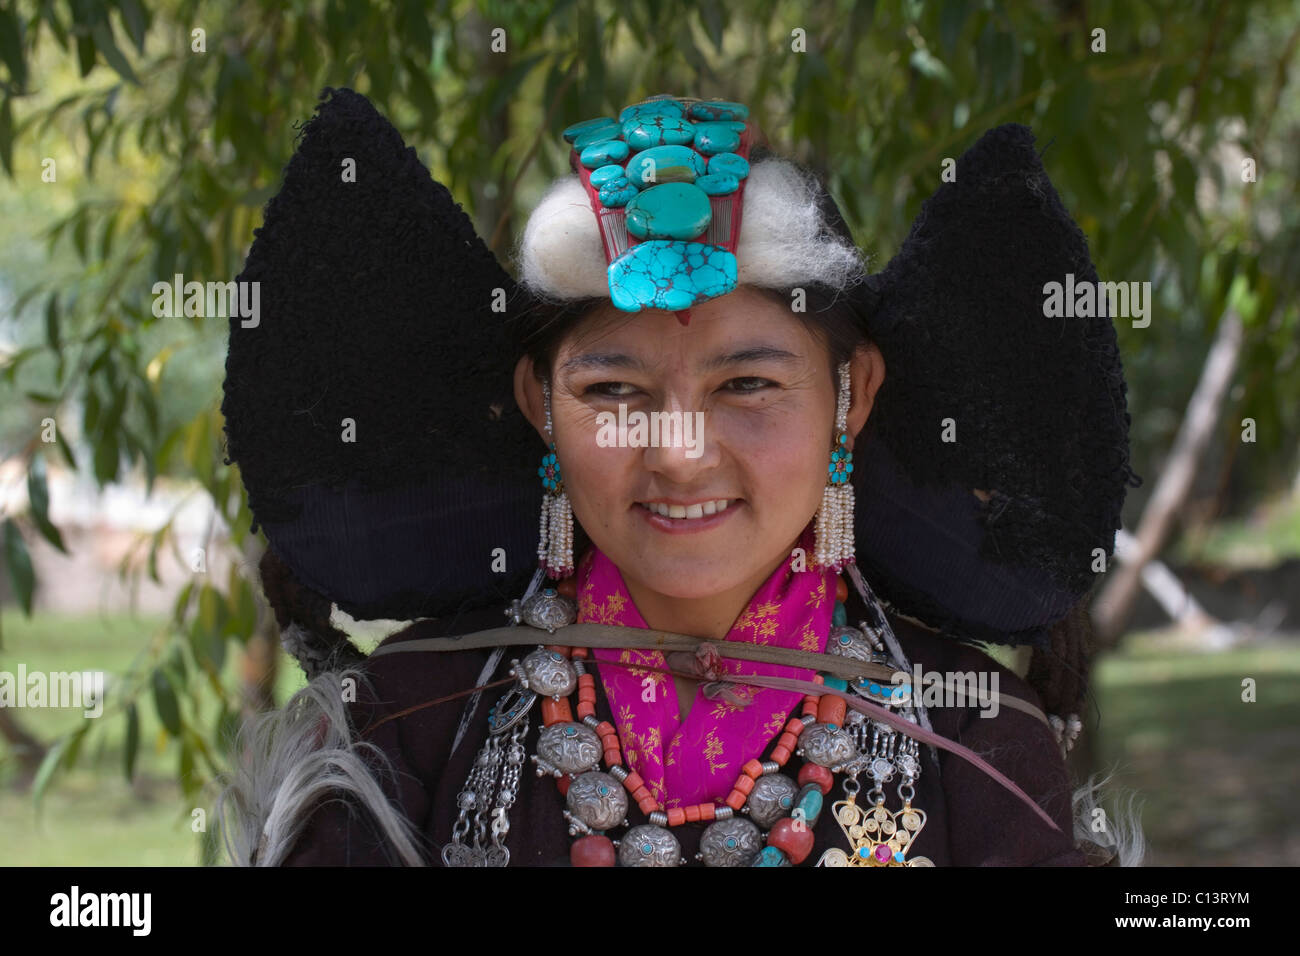 Local tribespeople in traditional costume come to Ladakh Festival, Leh, India Stock Photo